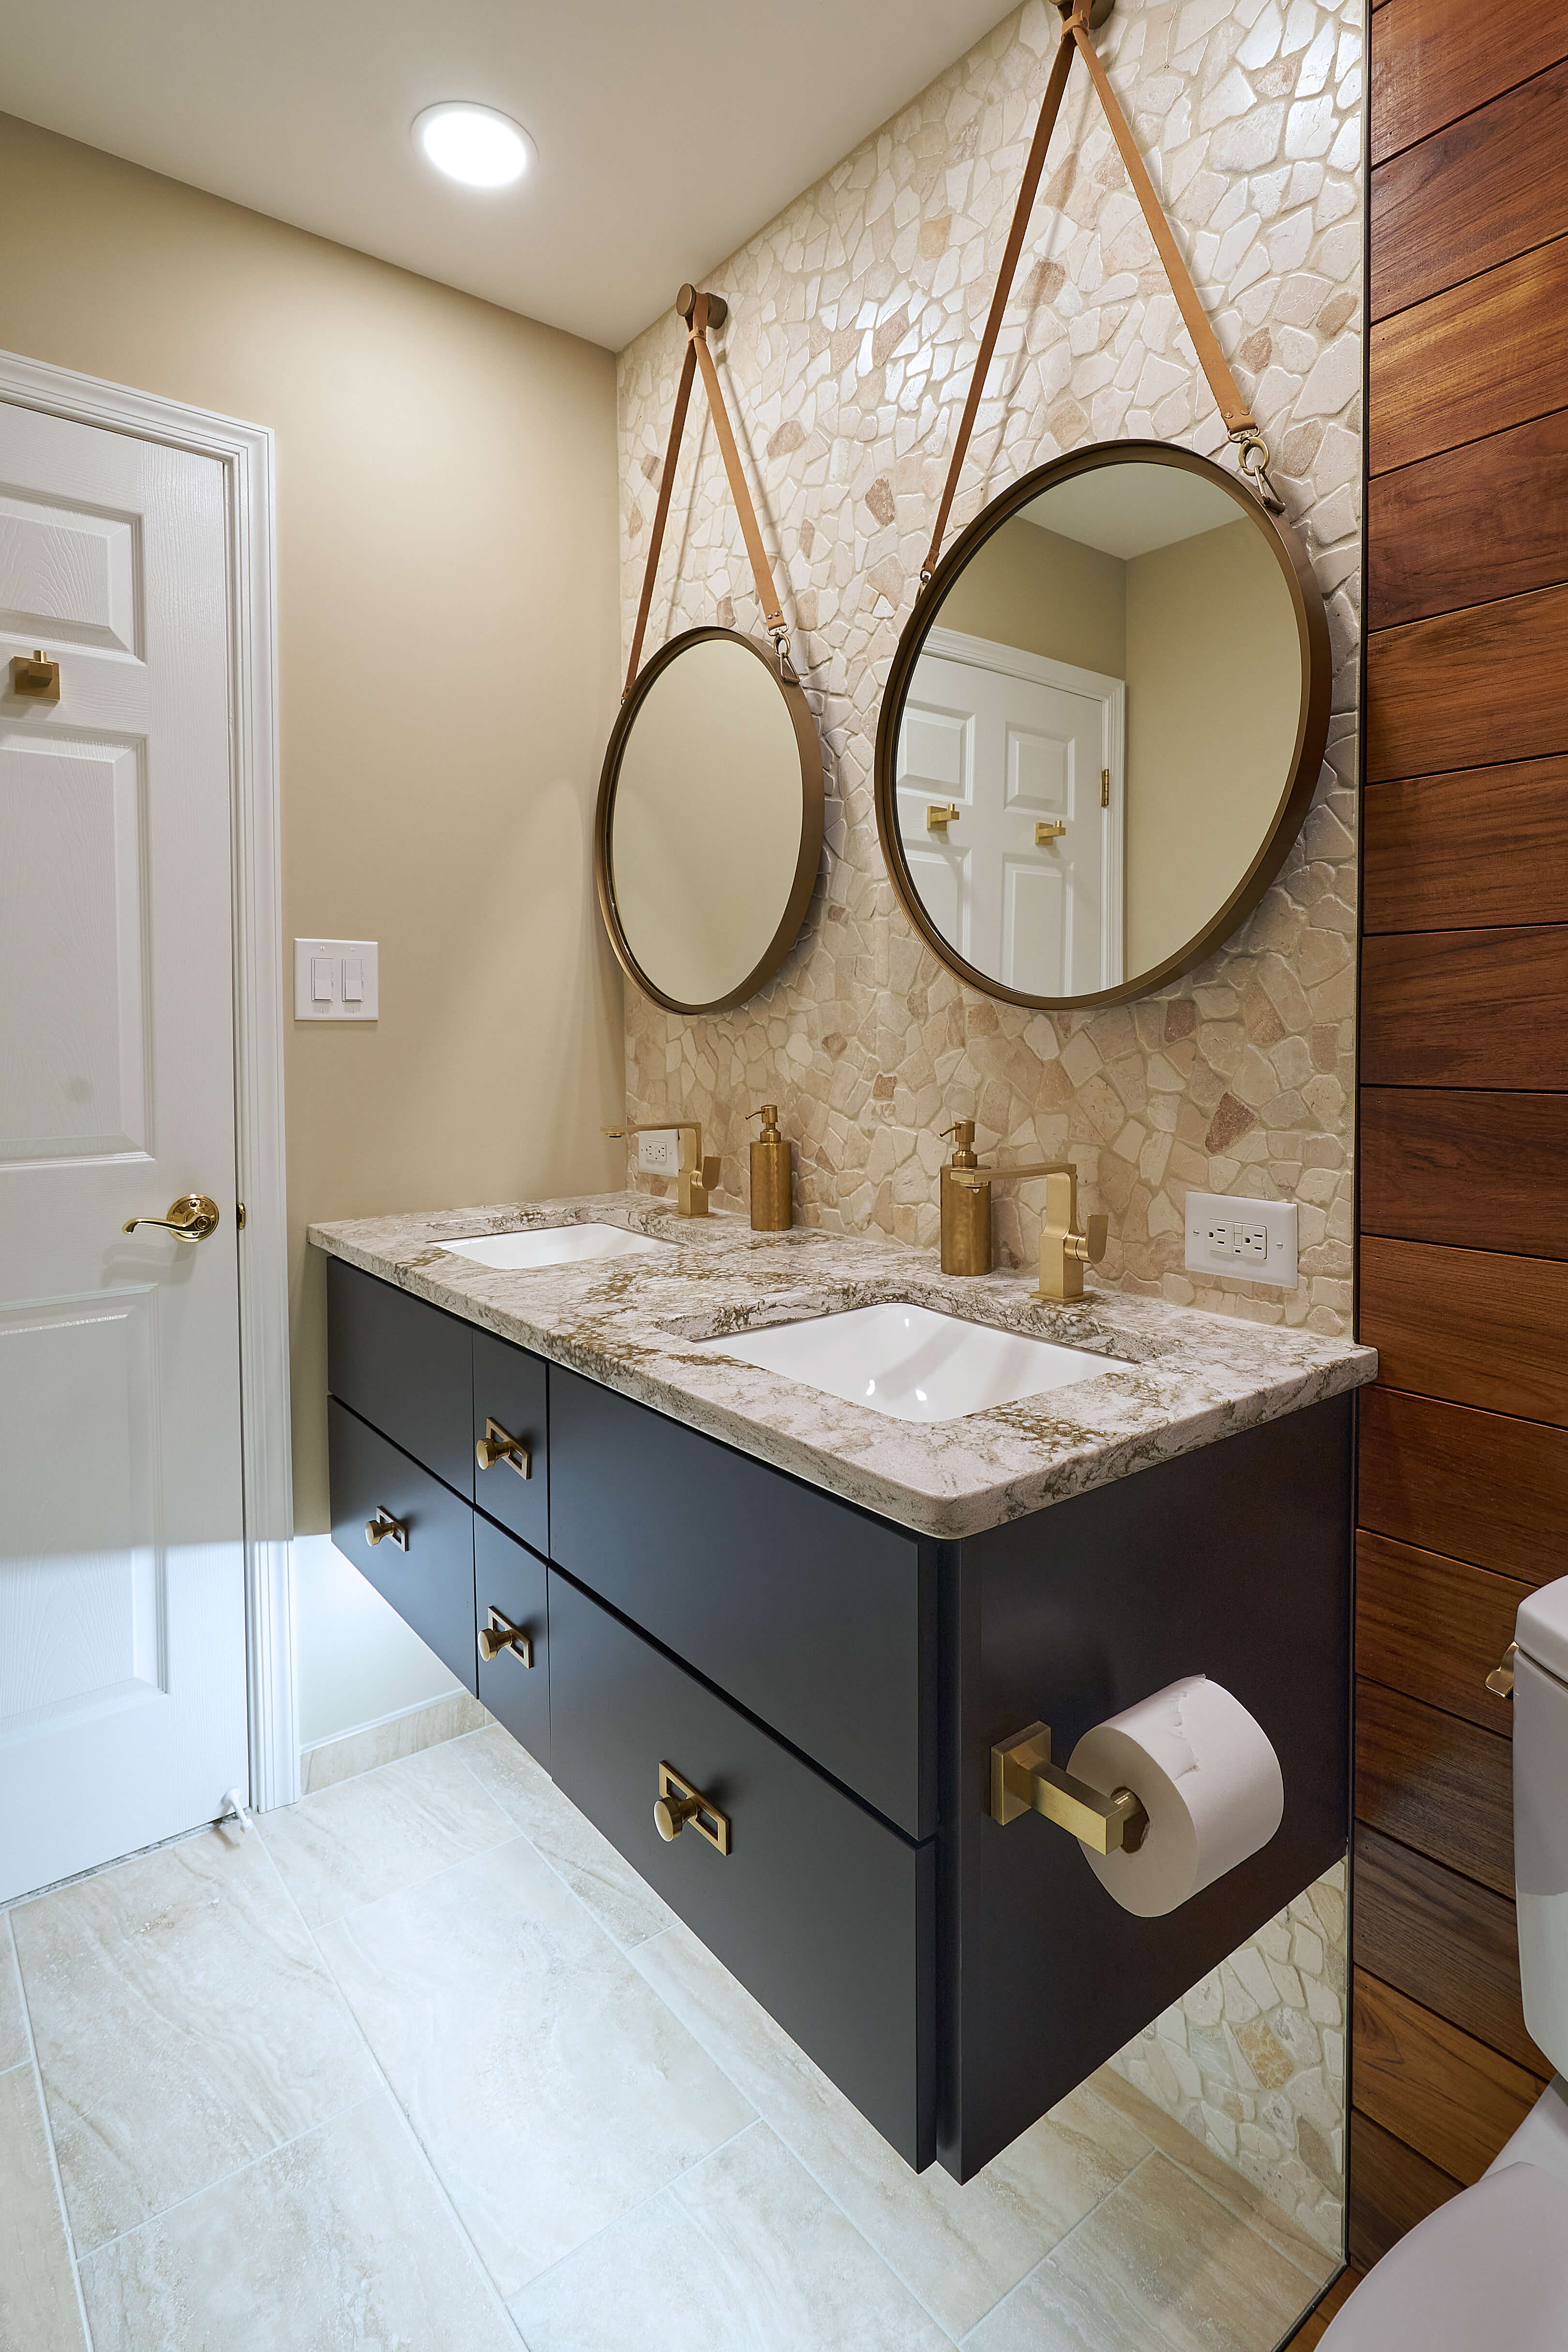 A contemporary bathroom design with warm stone and wood wall paneling featuring a modern black painted wall hung vanity with two bathroom sinks and two round rope-haning vanity mirrors.